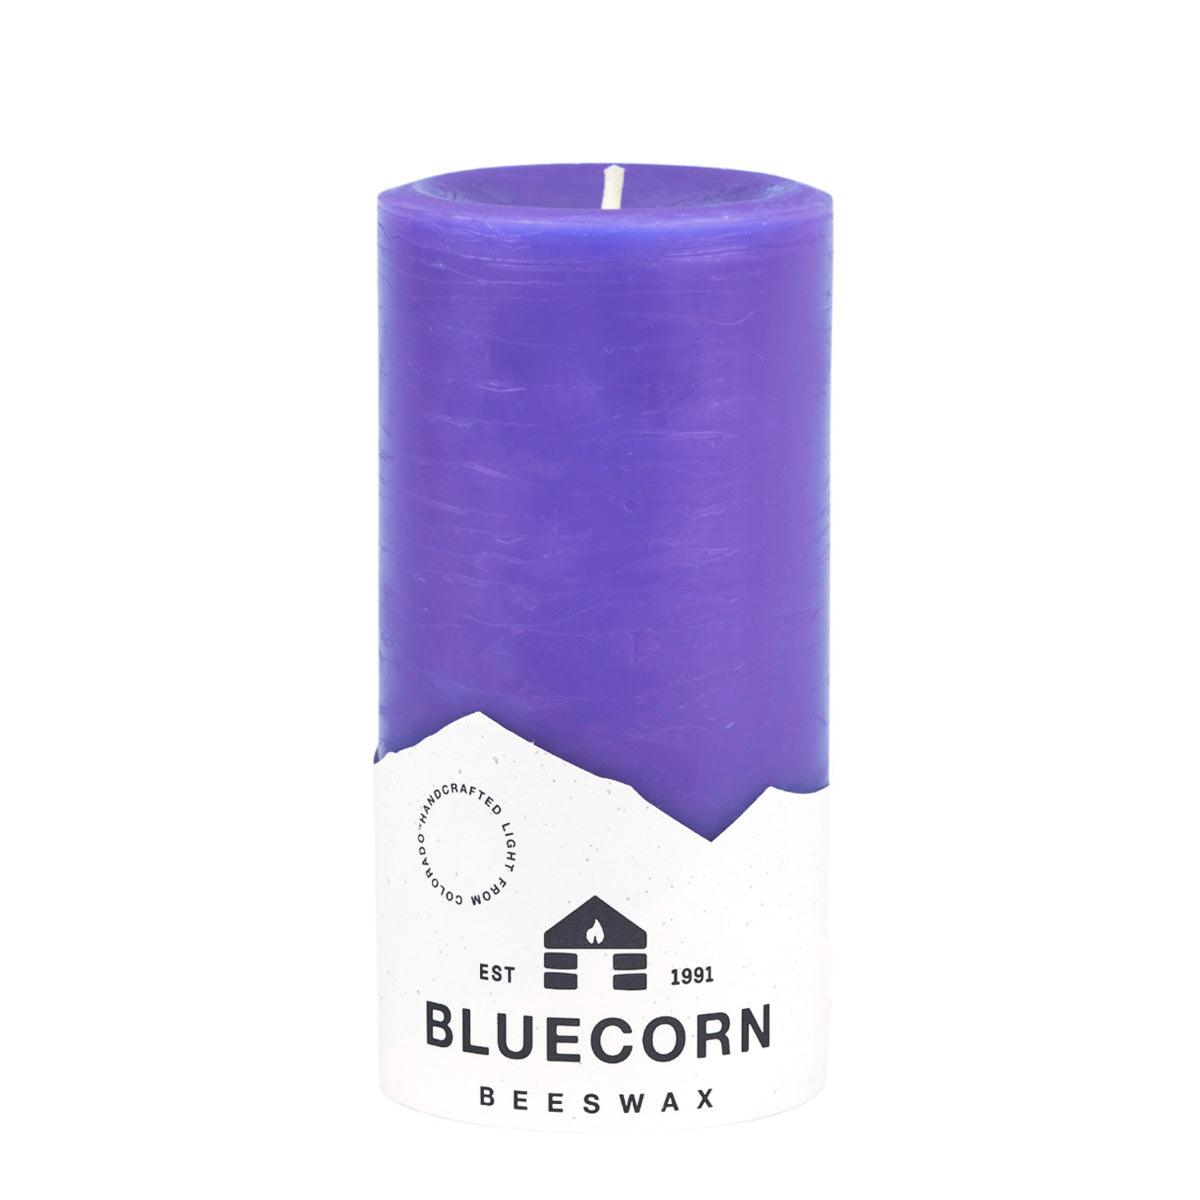 Bluecorn Beeswax 100% Pure Beeswax 3" x 6" Colored Pillar Candle is Lilac in color. Burn Time: 90 hours. Made with 100% Pure Beeswax, is . Made with 100% pure cotton wick, no lead and paraffin free. Clean burning and non-toxic. Features Bluecorn Beeswax label printed on 100% recycled paper. 